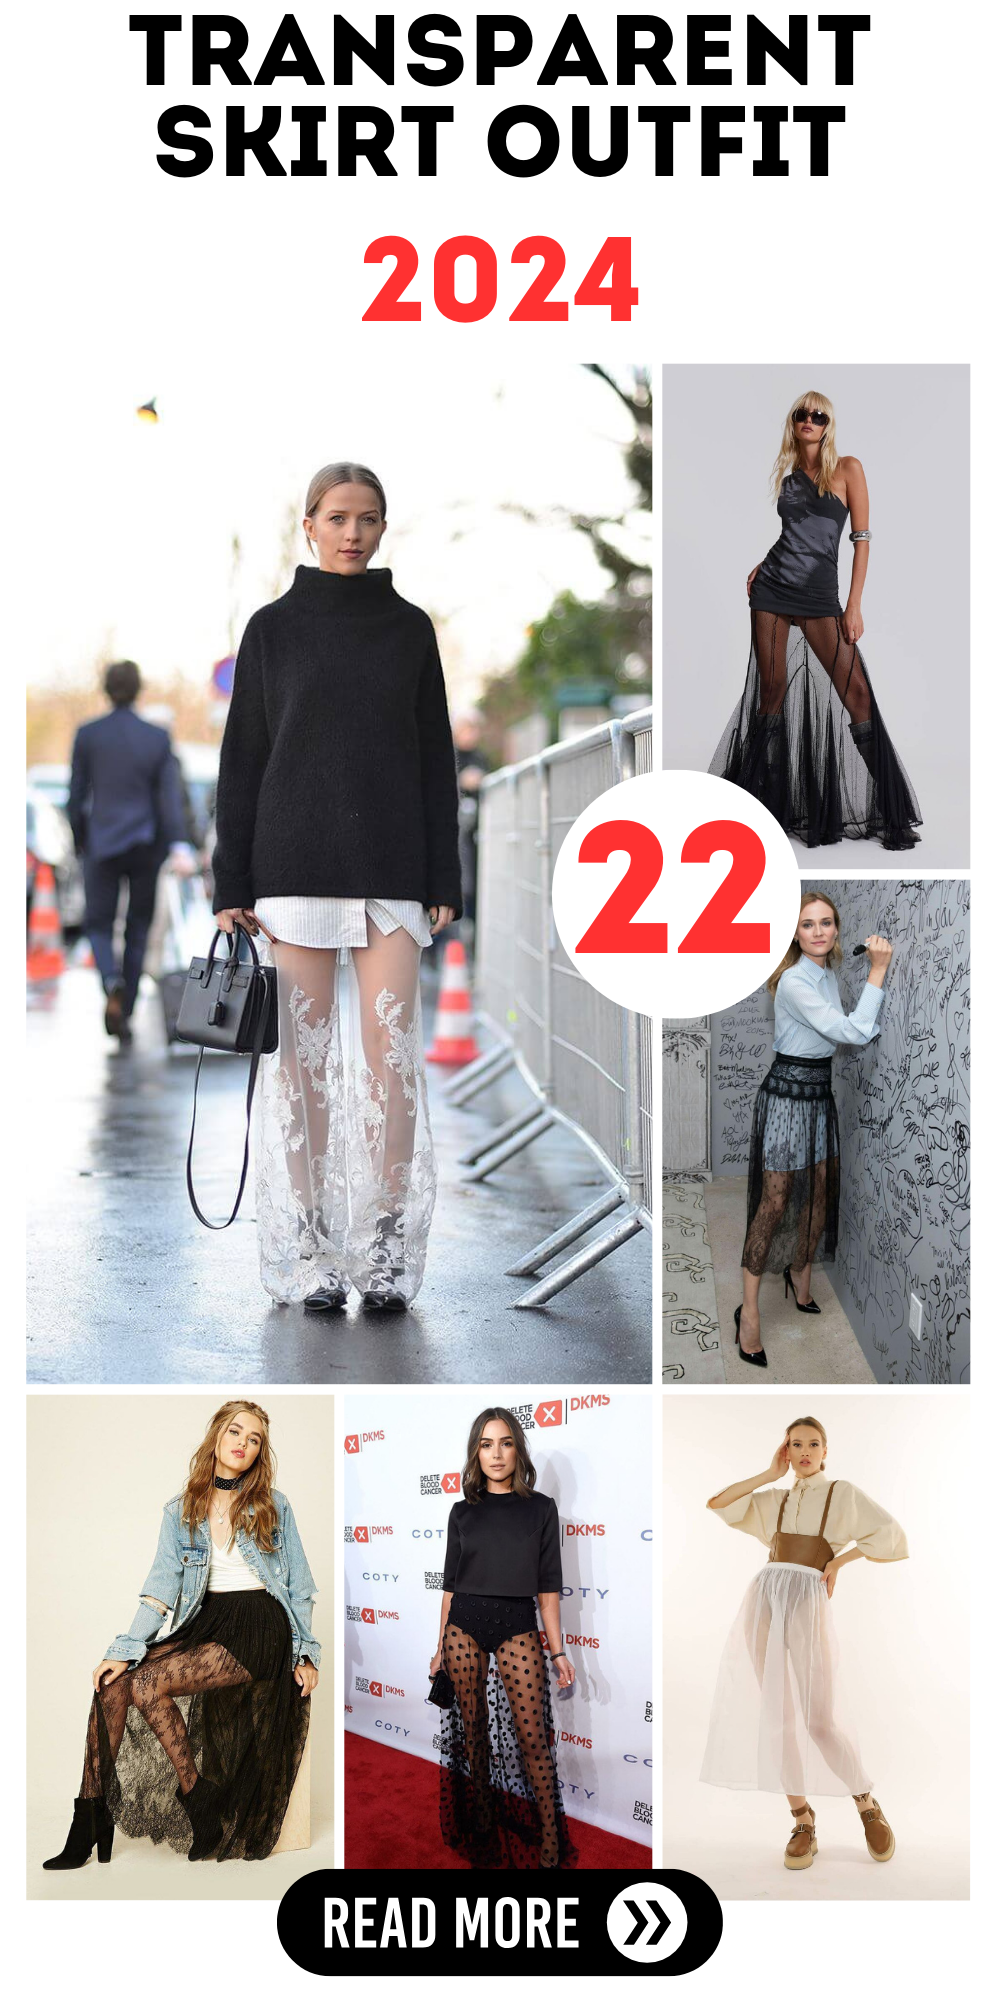 Transparent skirts are already a key trend for 2024